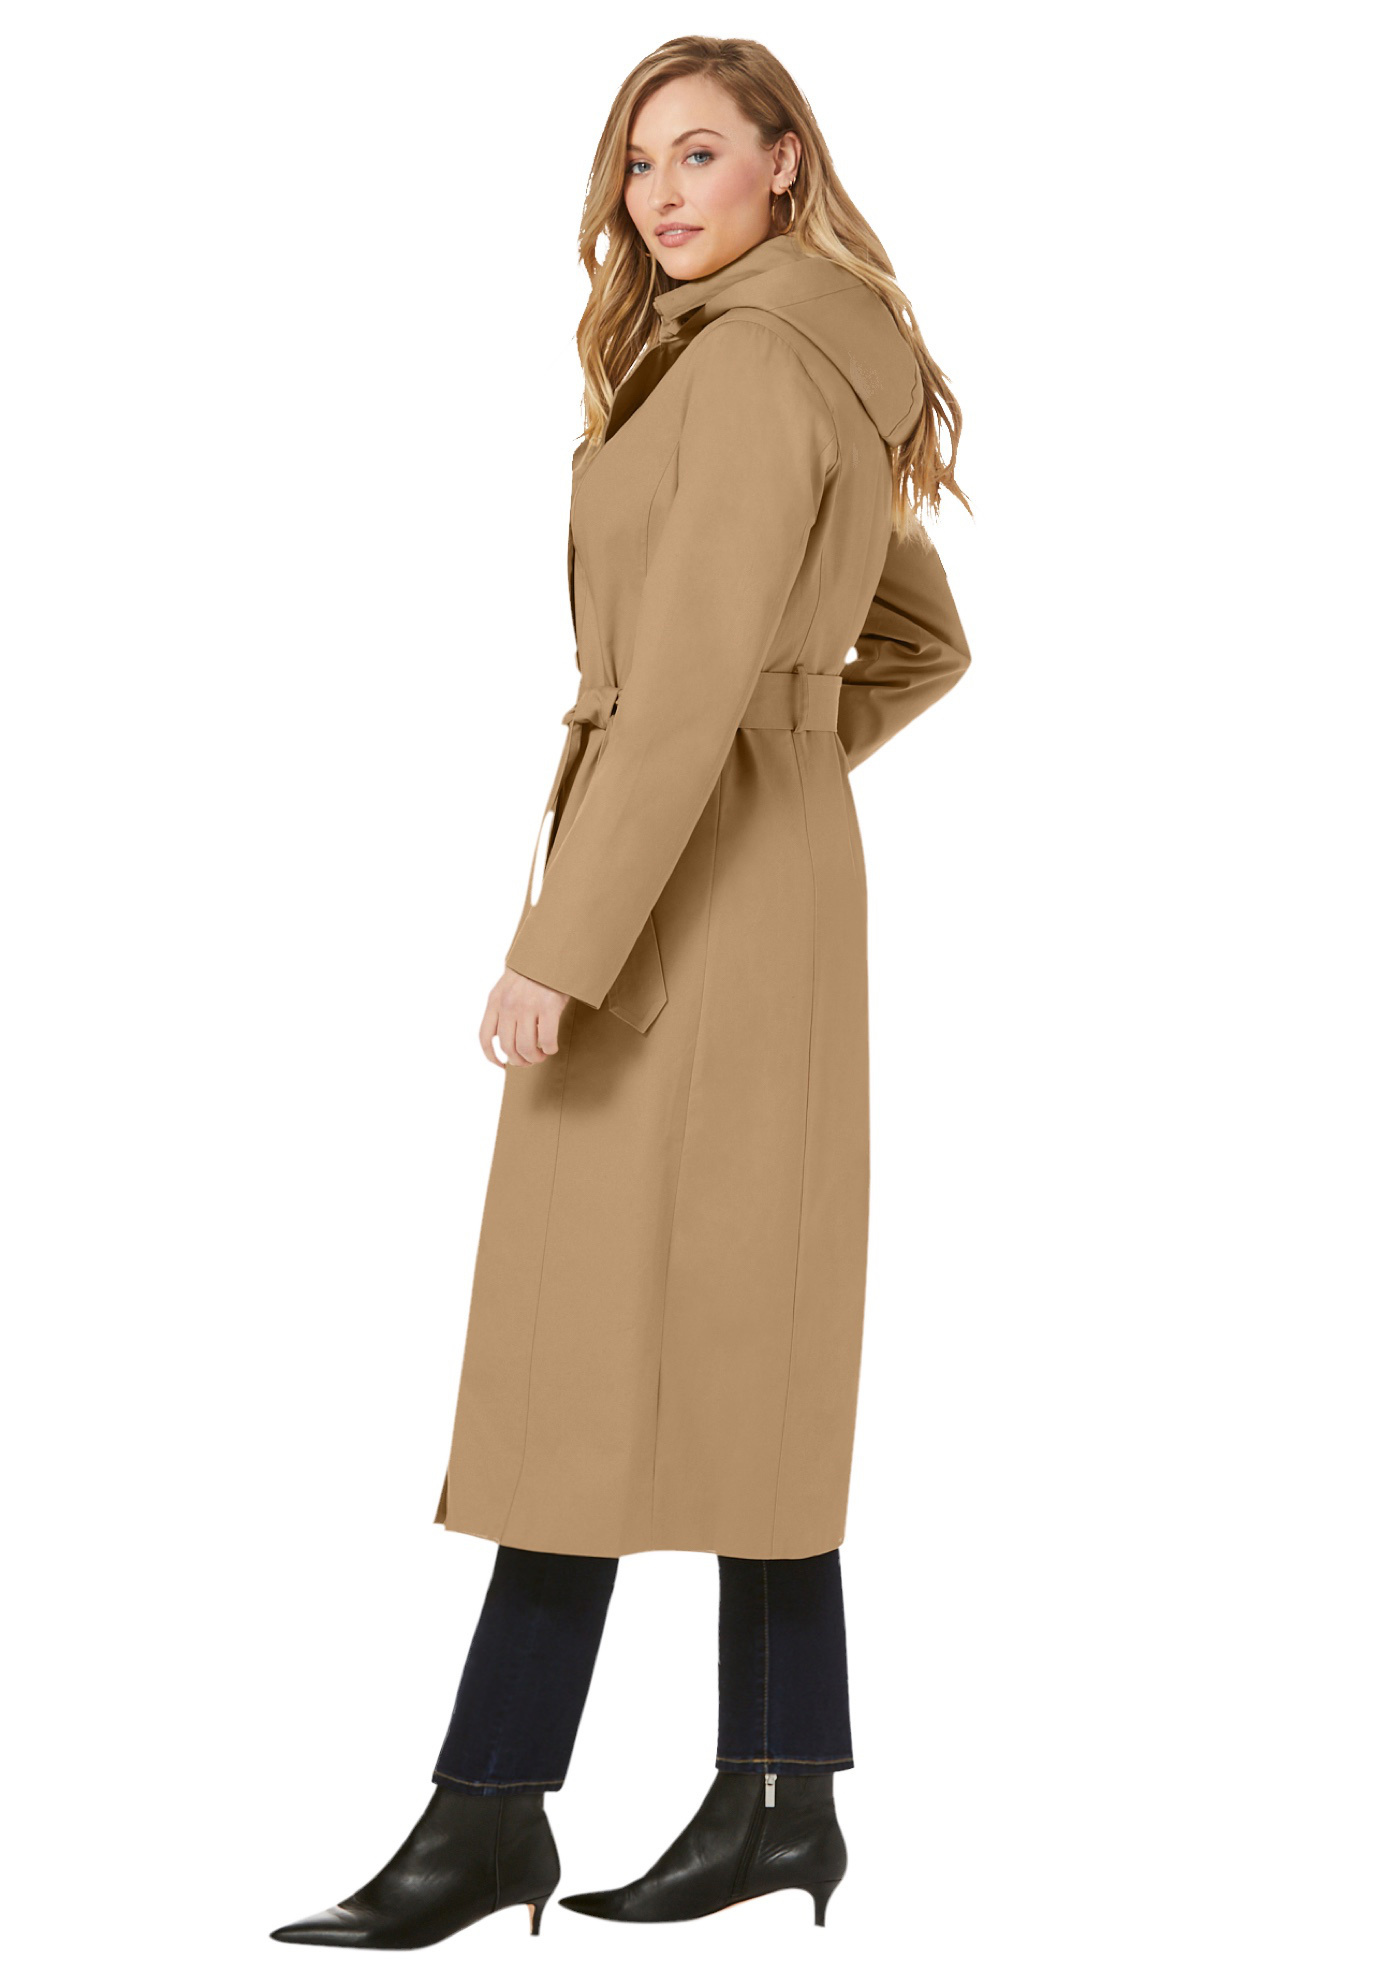 Jessica London Women's Plus Size Double Breasted Long Trench Coat Raincoat - image 4 of 6